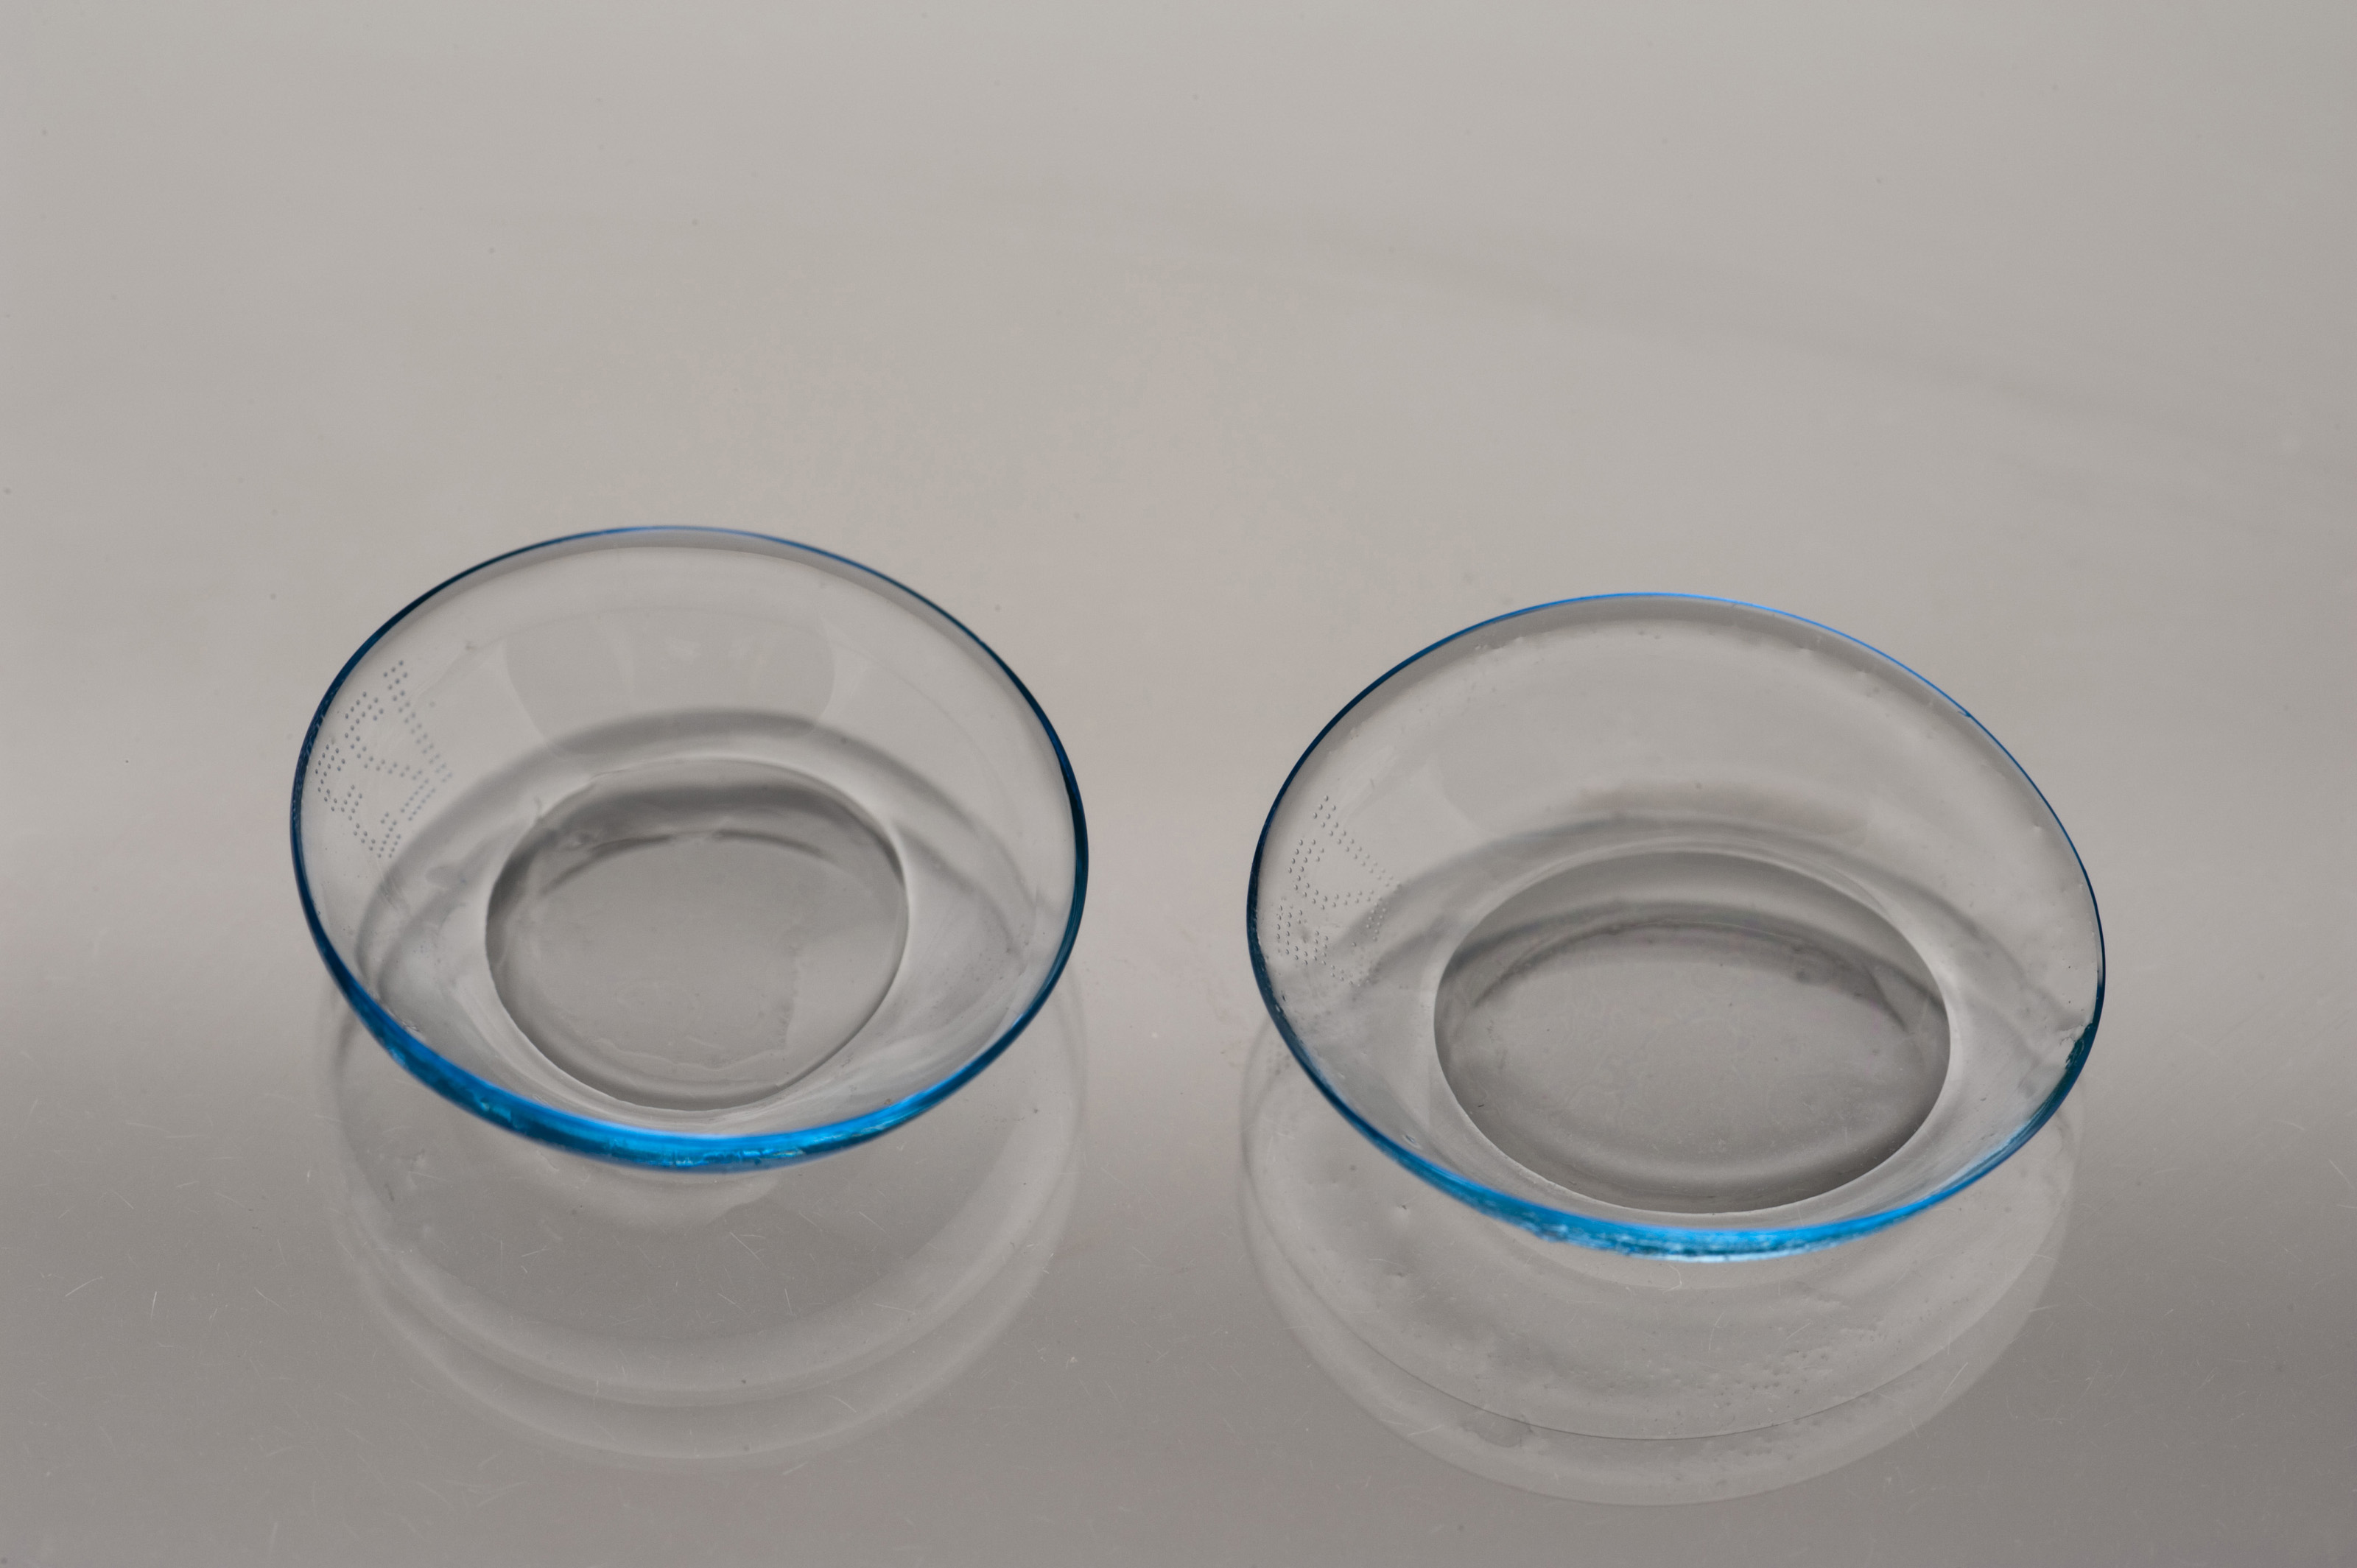 Pair of plastic contact lenses7148 Stockarch Free Stock